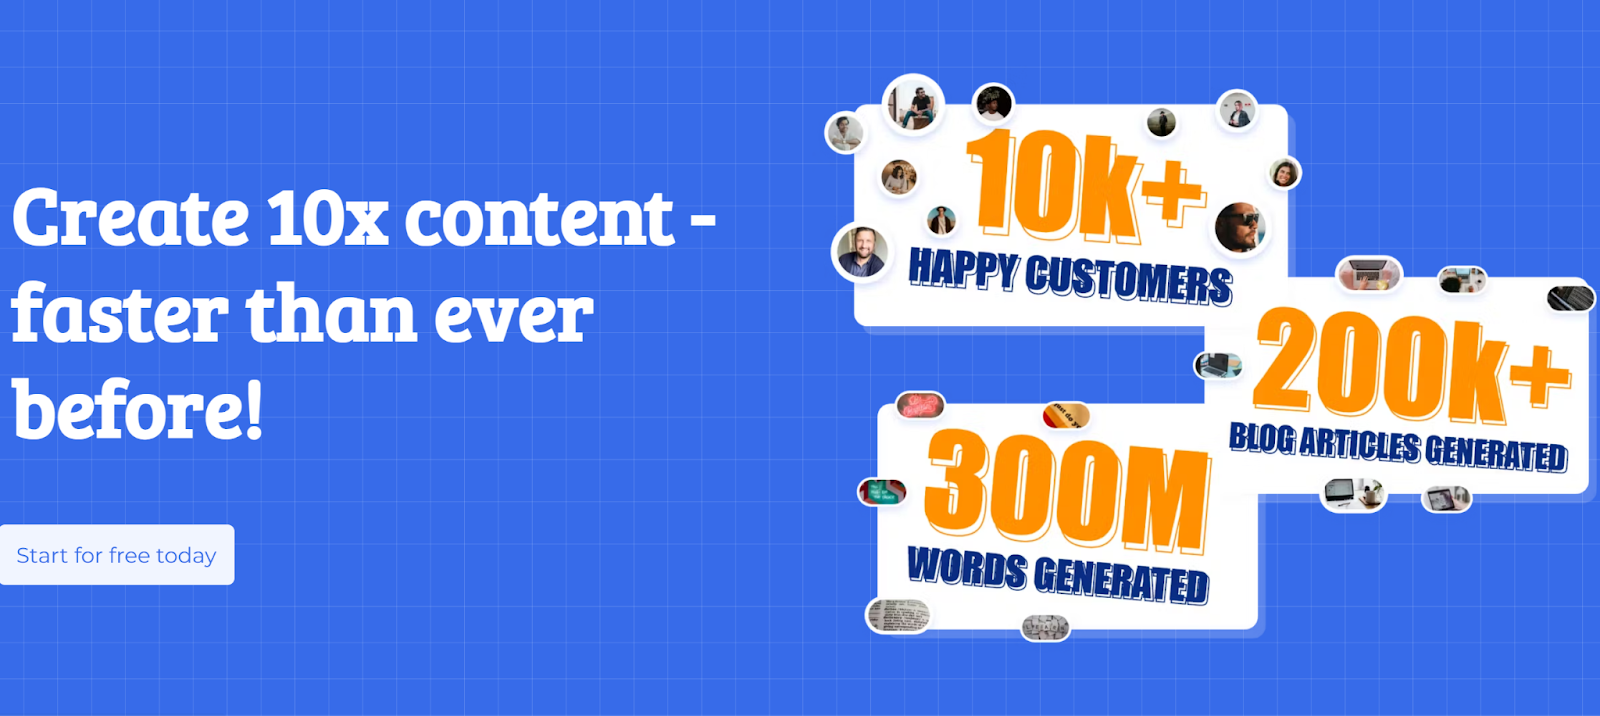 CG's Content Generator helps you create engaging content faster and efficiently.